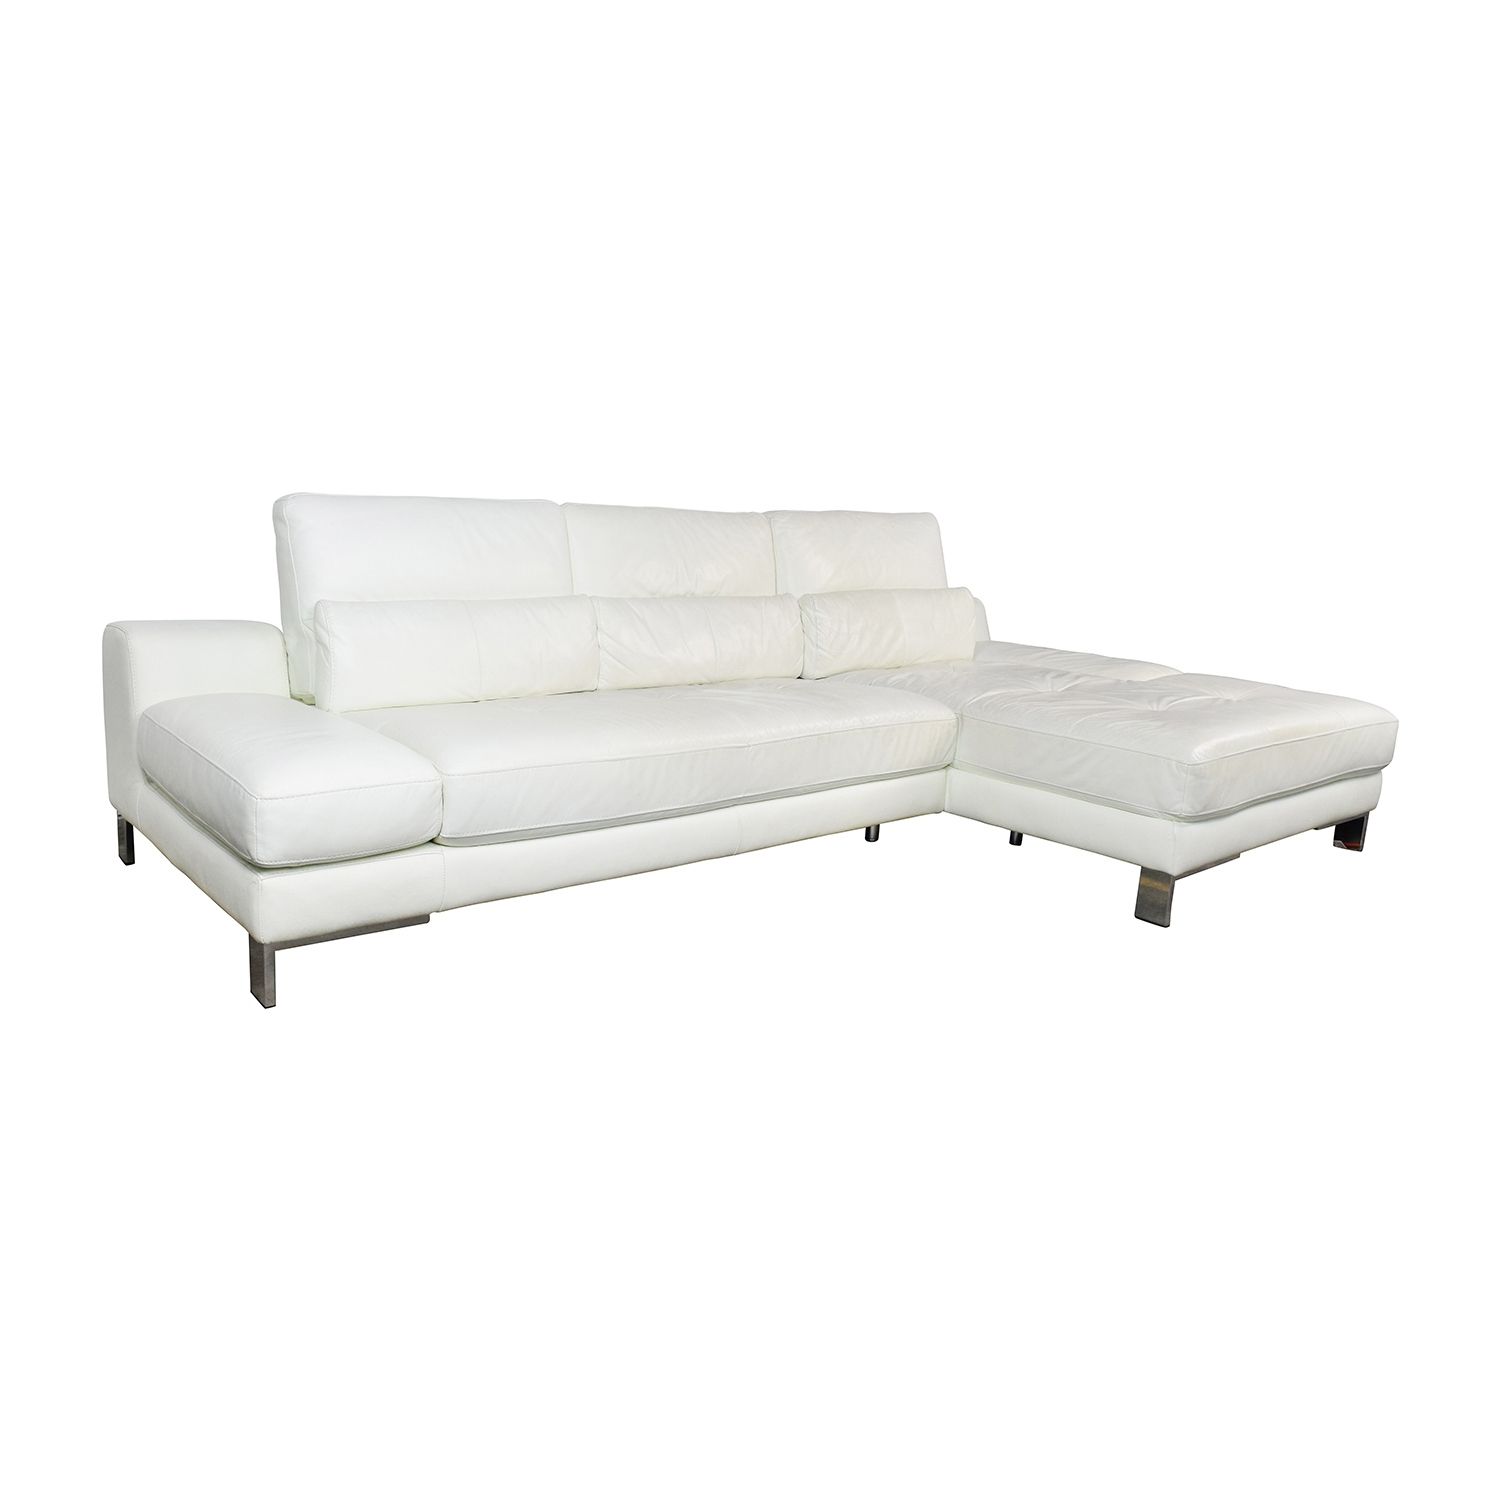 72% Off – Mobilia Canada Mobilia Canada Funktion White Leather Intended For Mobilia Sectional Sofas (Photo 4 of 10)